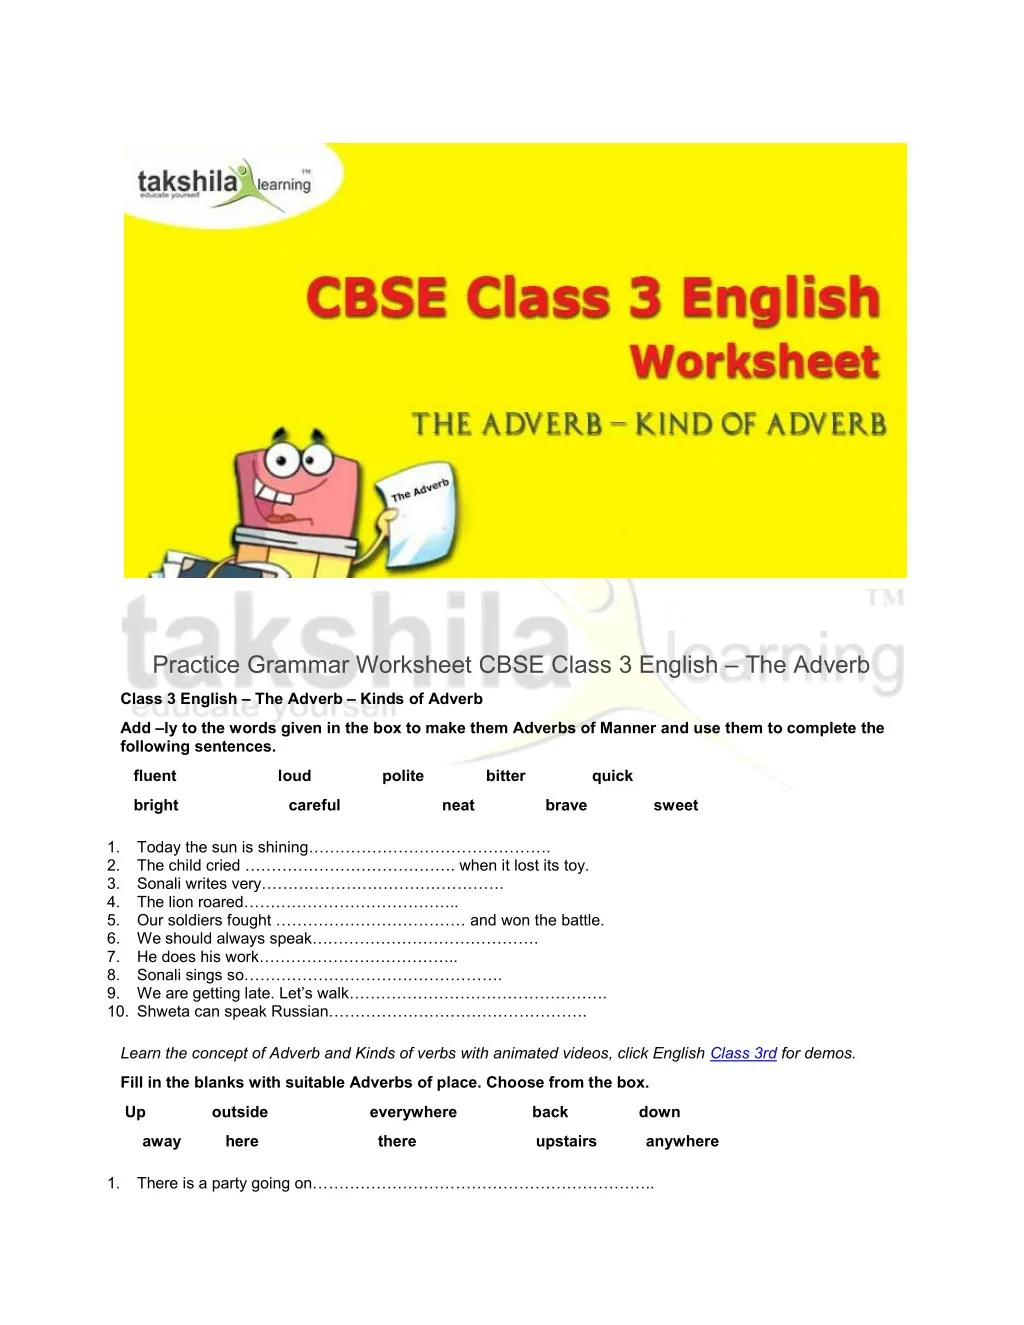 PPT Practice Grammar Worksheet For CBSE Class 3 English The Adverb PowerPoint Presentation